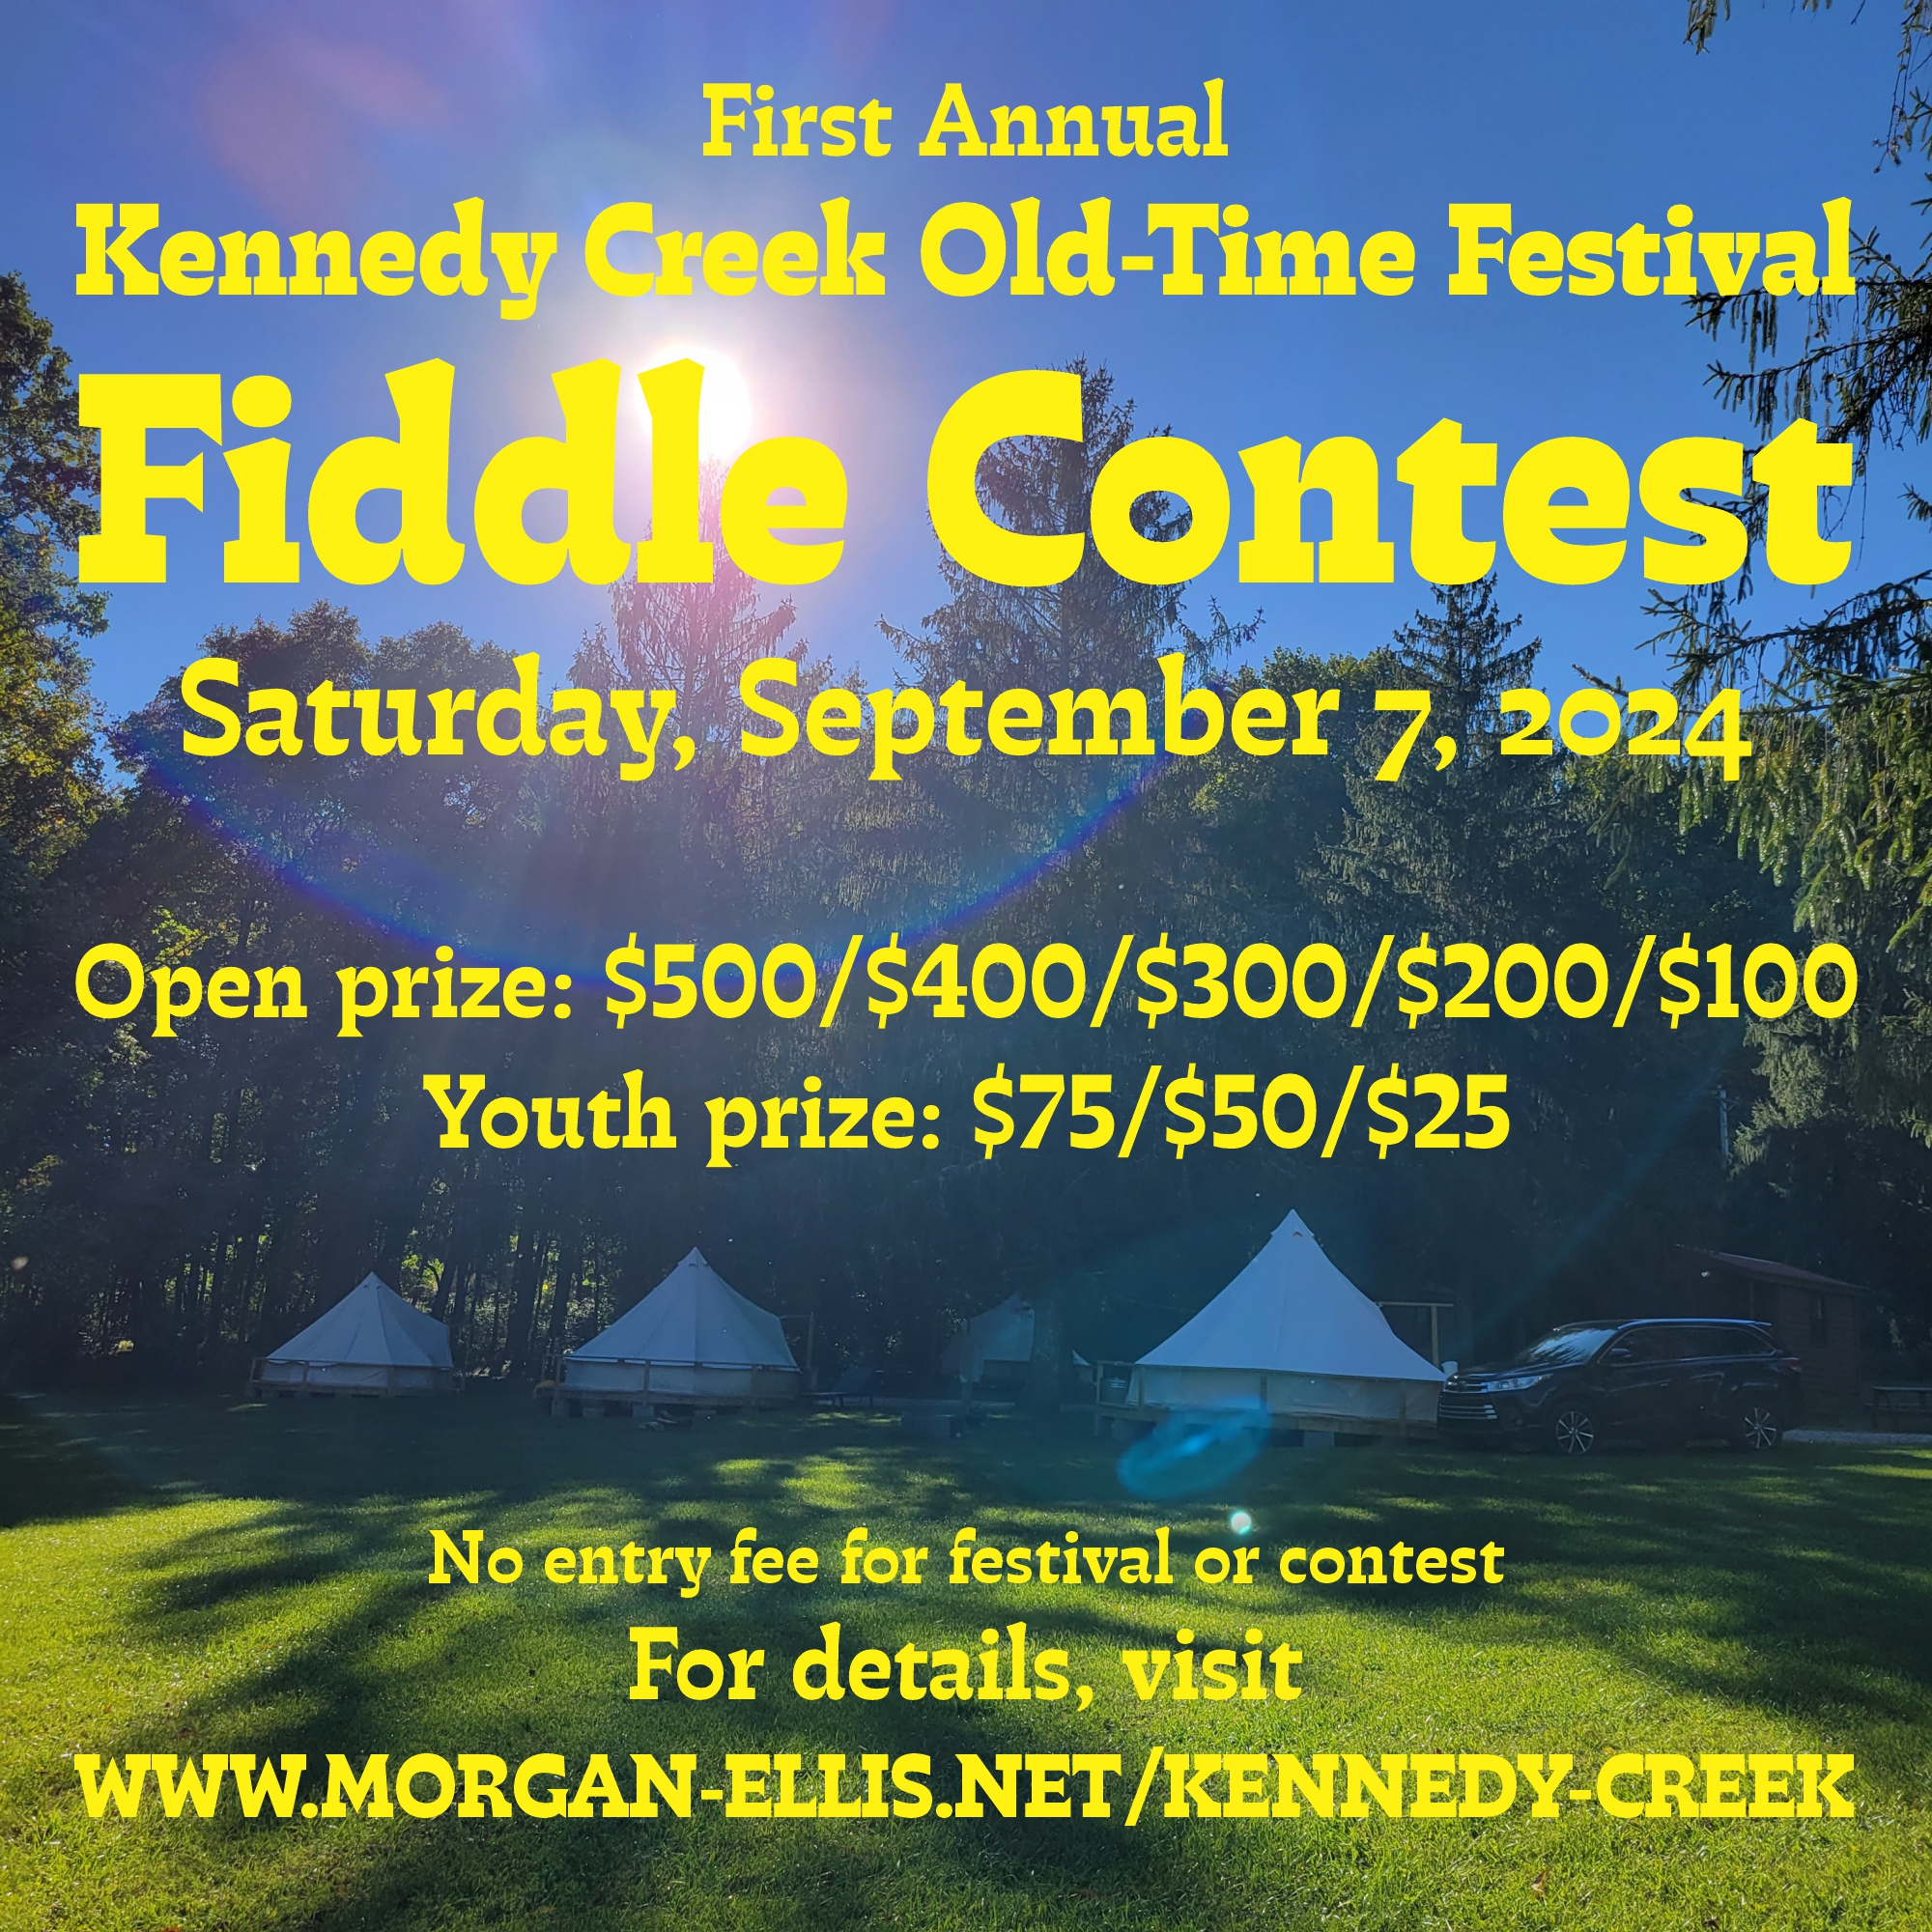 Kennedy Creek Old-Time Festival Fiddle Contest